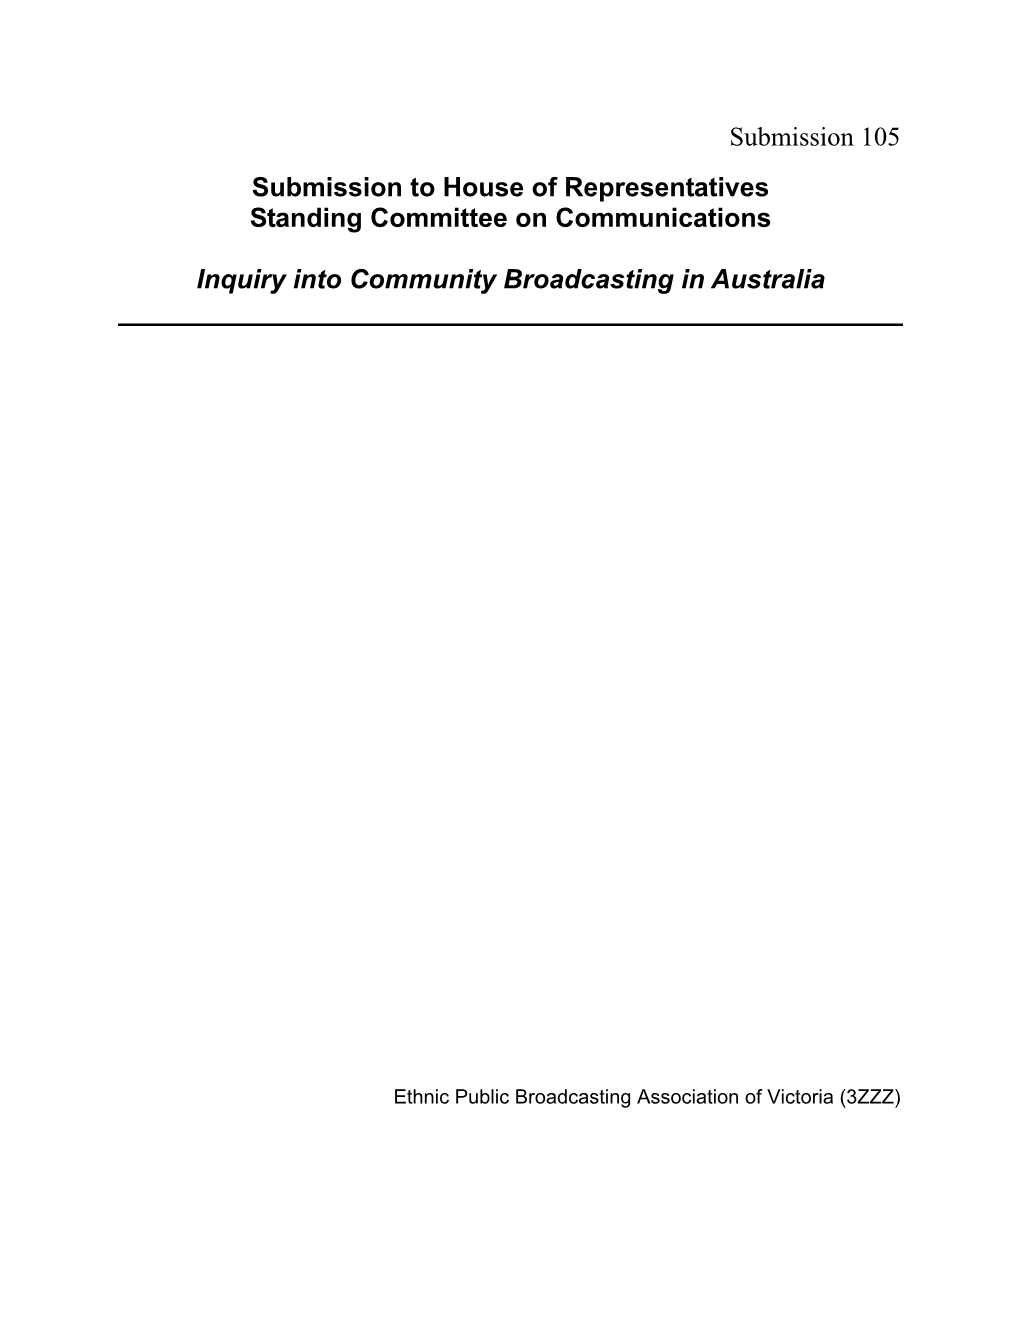 Submission to House of Representatives Standing Committee on Communications